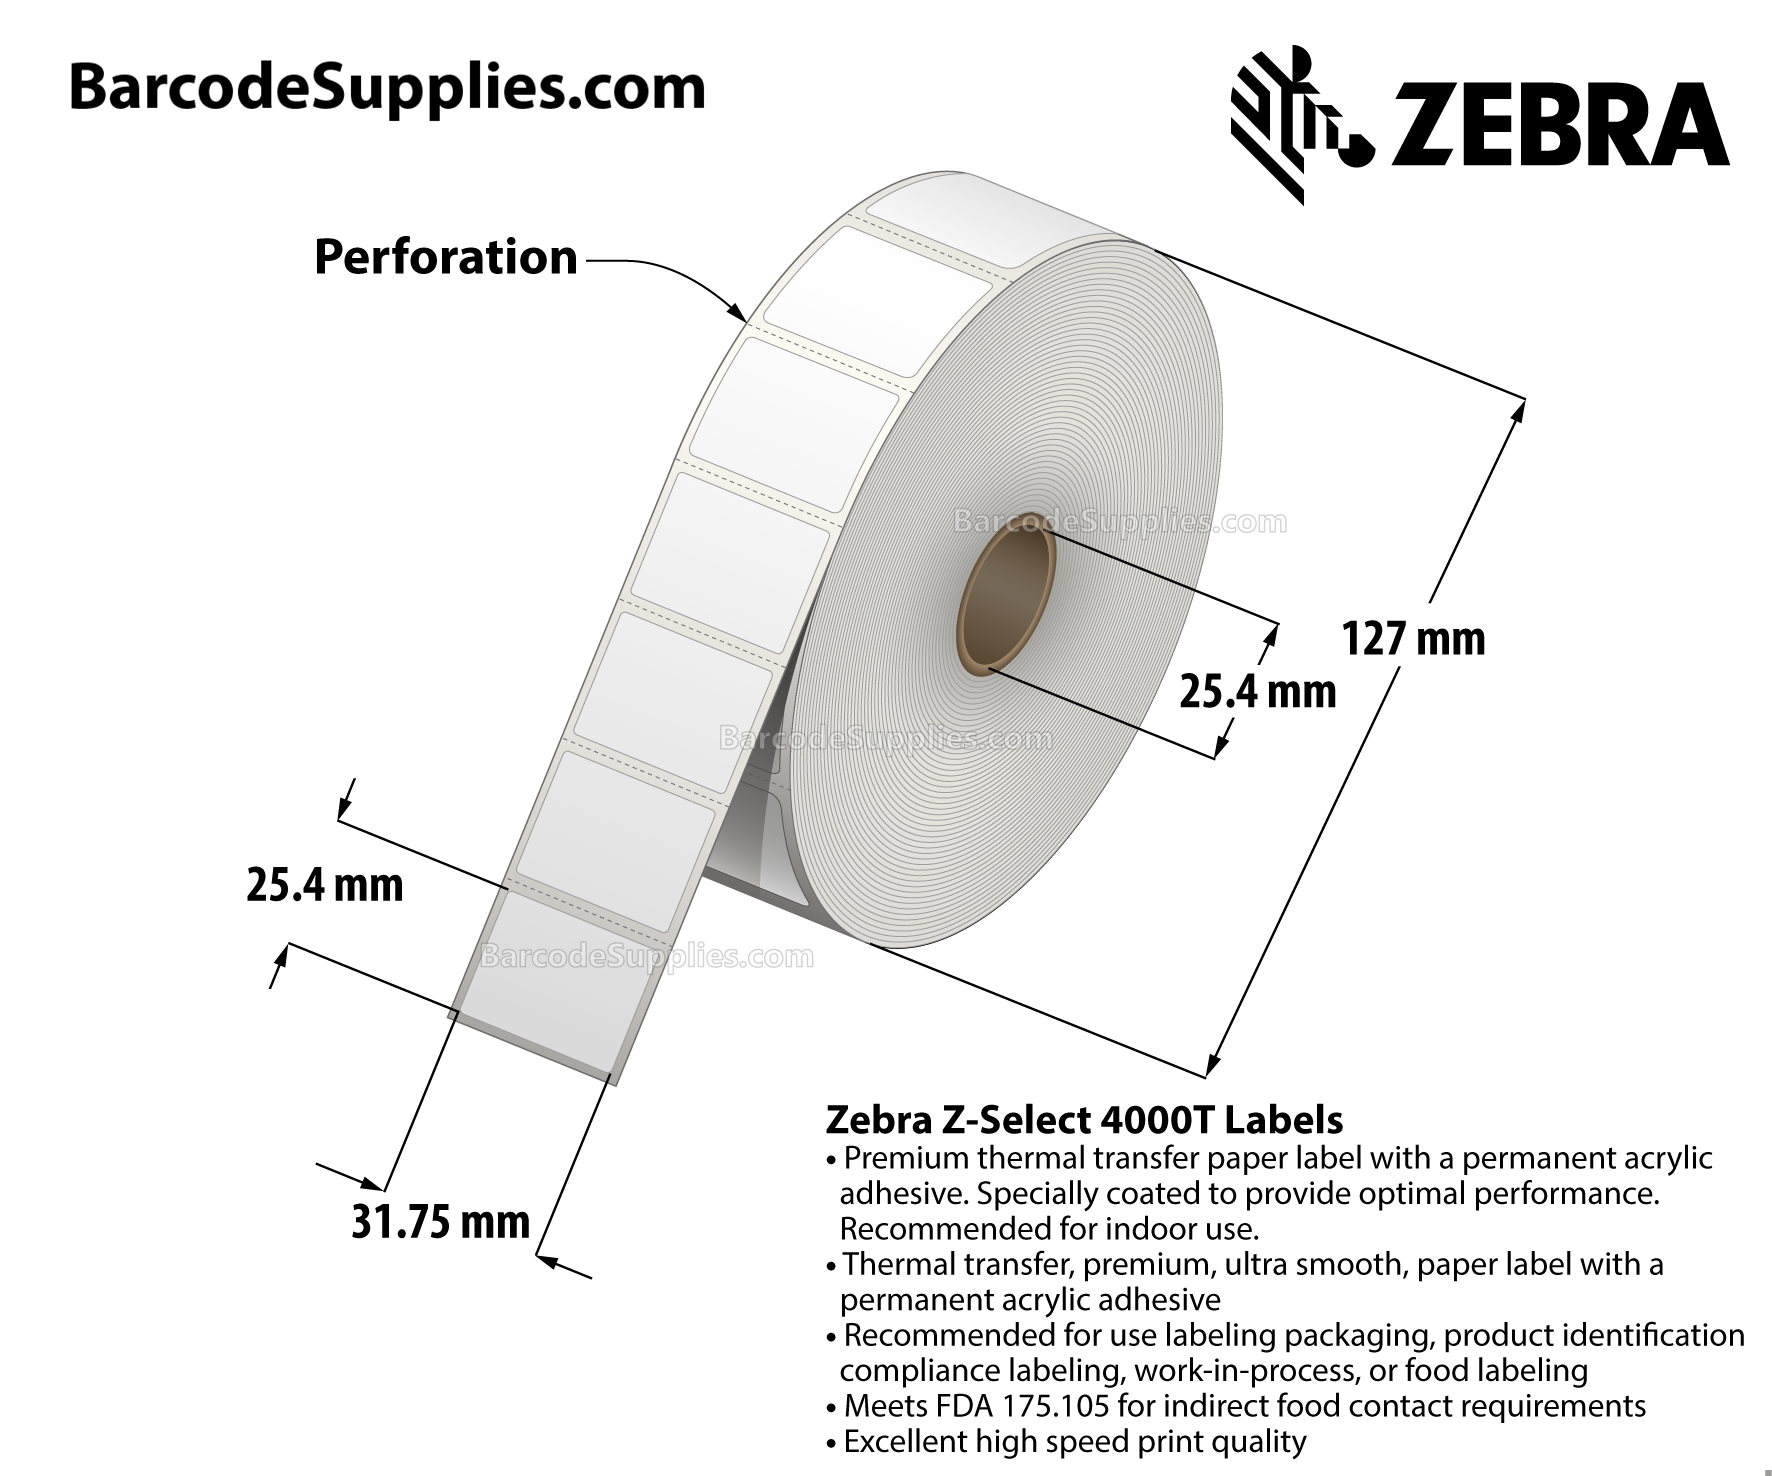 1.25 x 1 Thermal Transfer White Z-Select 4000T Labels With Permanent Adhesive - Perforated - 2580 Labels Per Roll - Carton Of 6 Rolls - 15480 Labels Total - MPN: 10009523